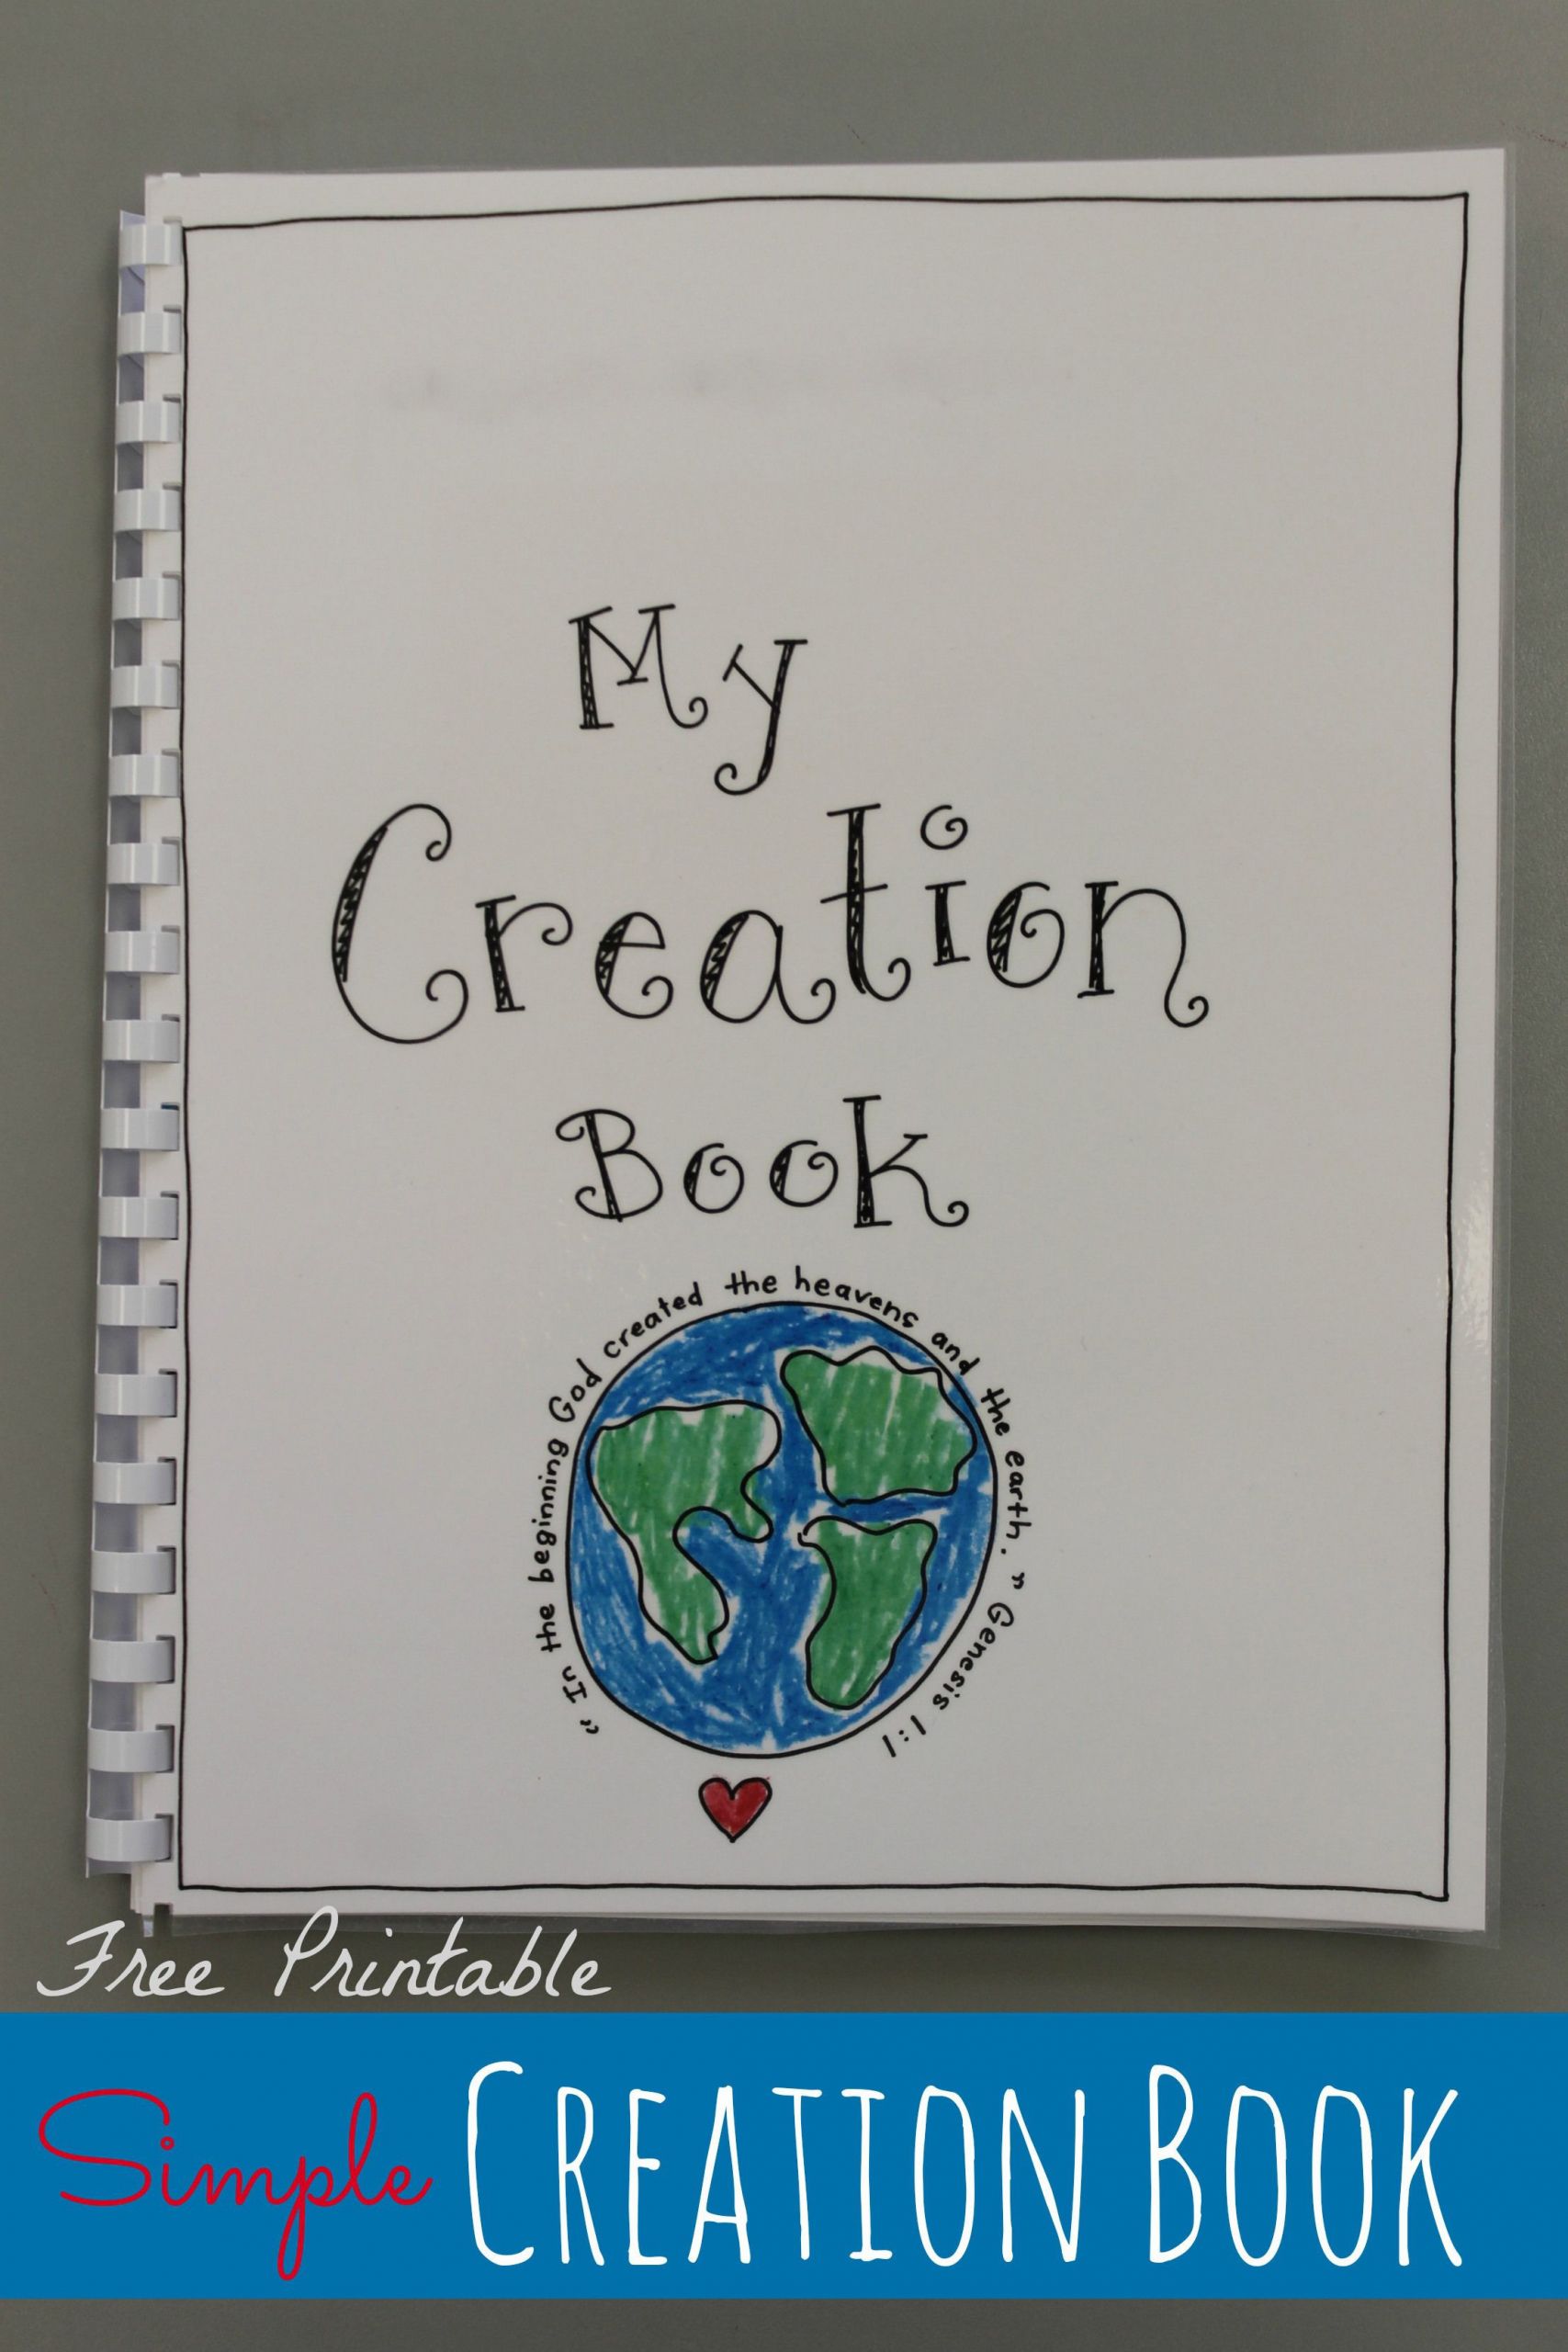 Bible Crafts For Preschoolers Free
 Creation Book FREE Printable